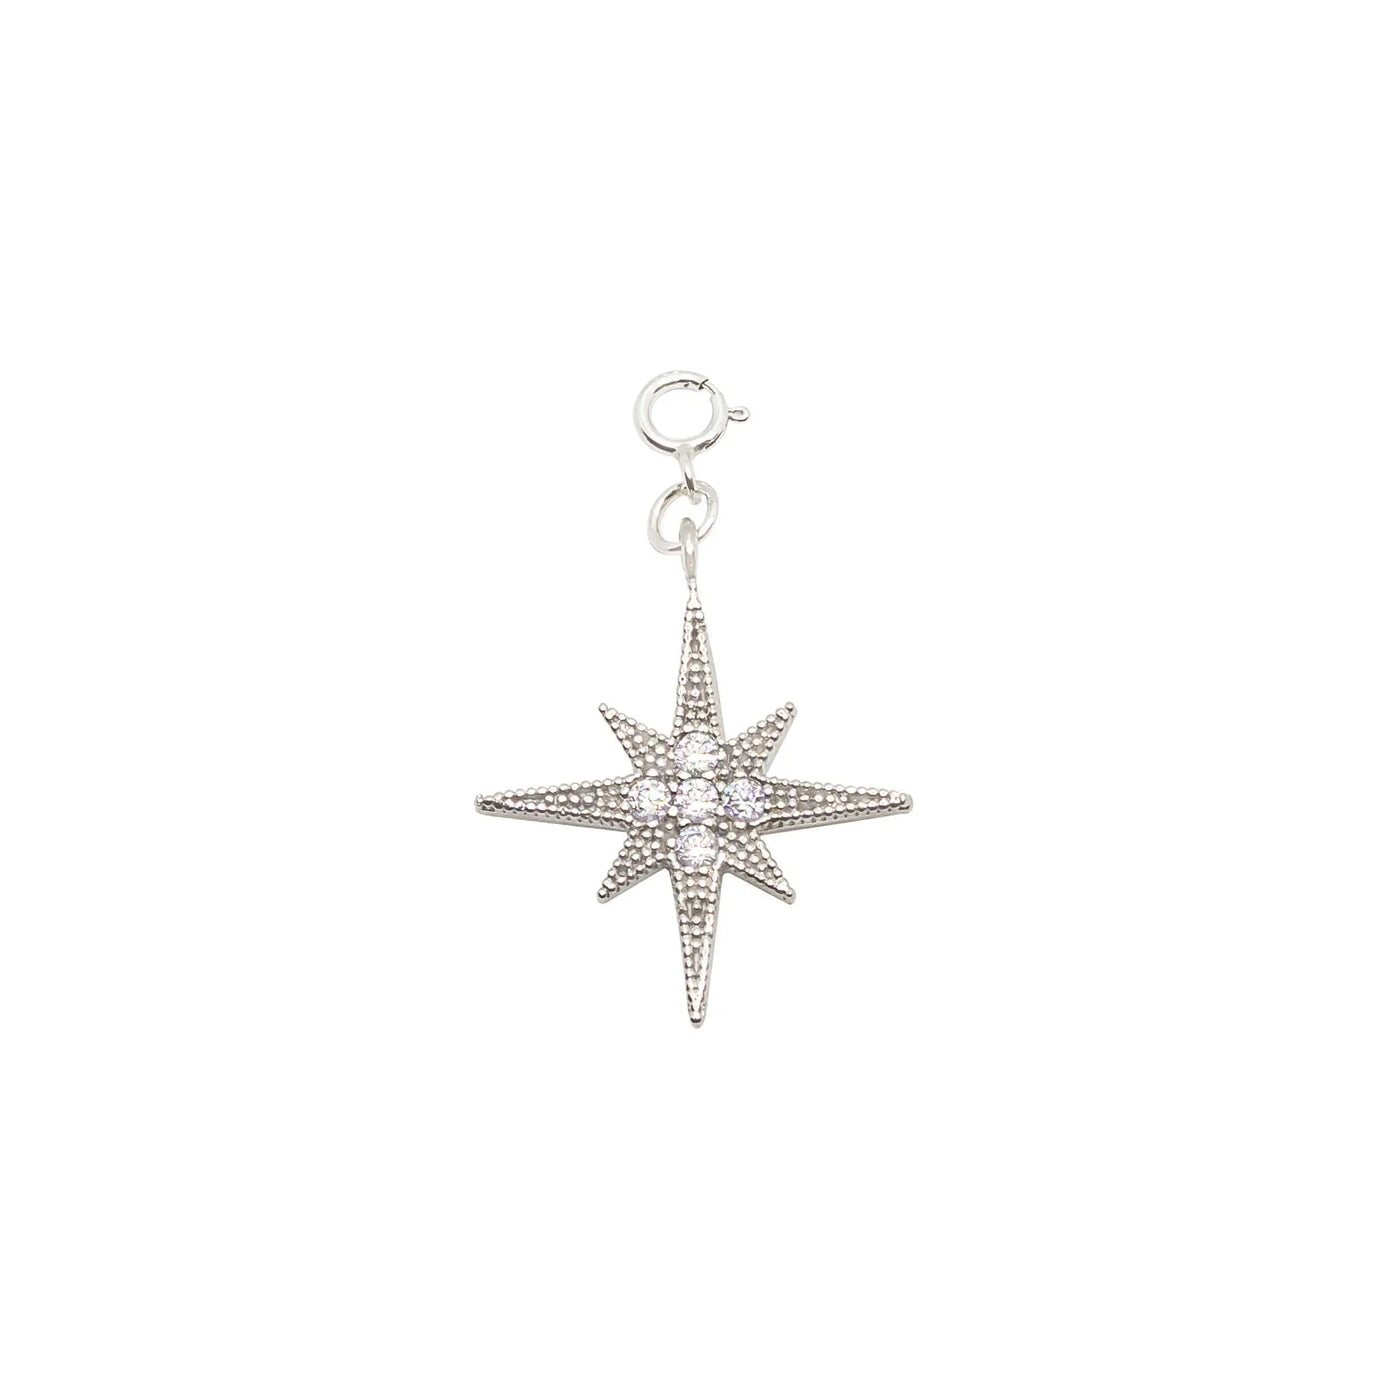 Shining Star Silver Charm LaCkore Couture